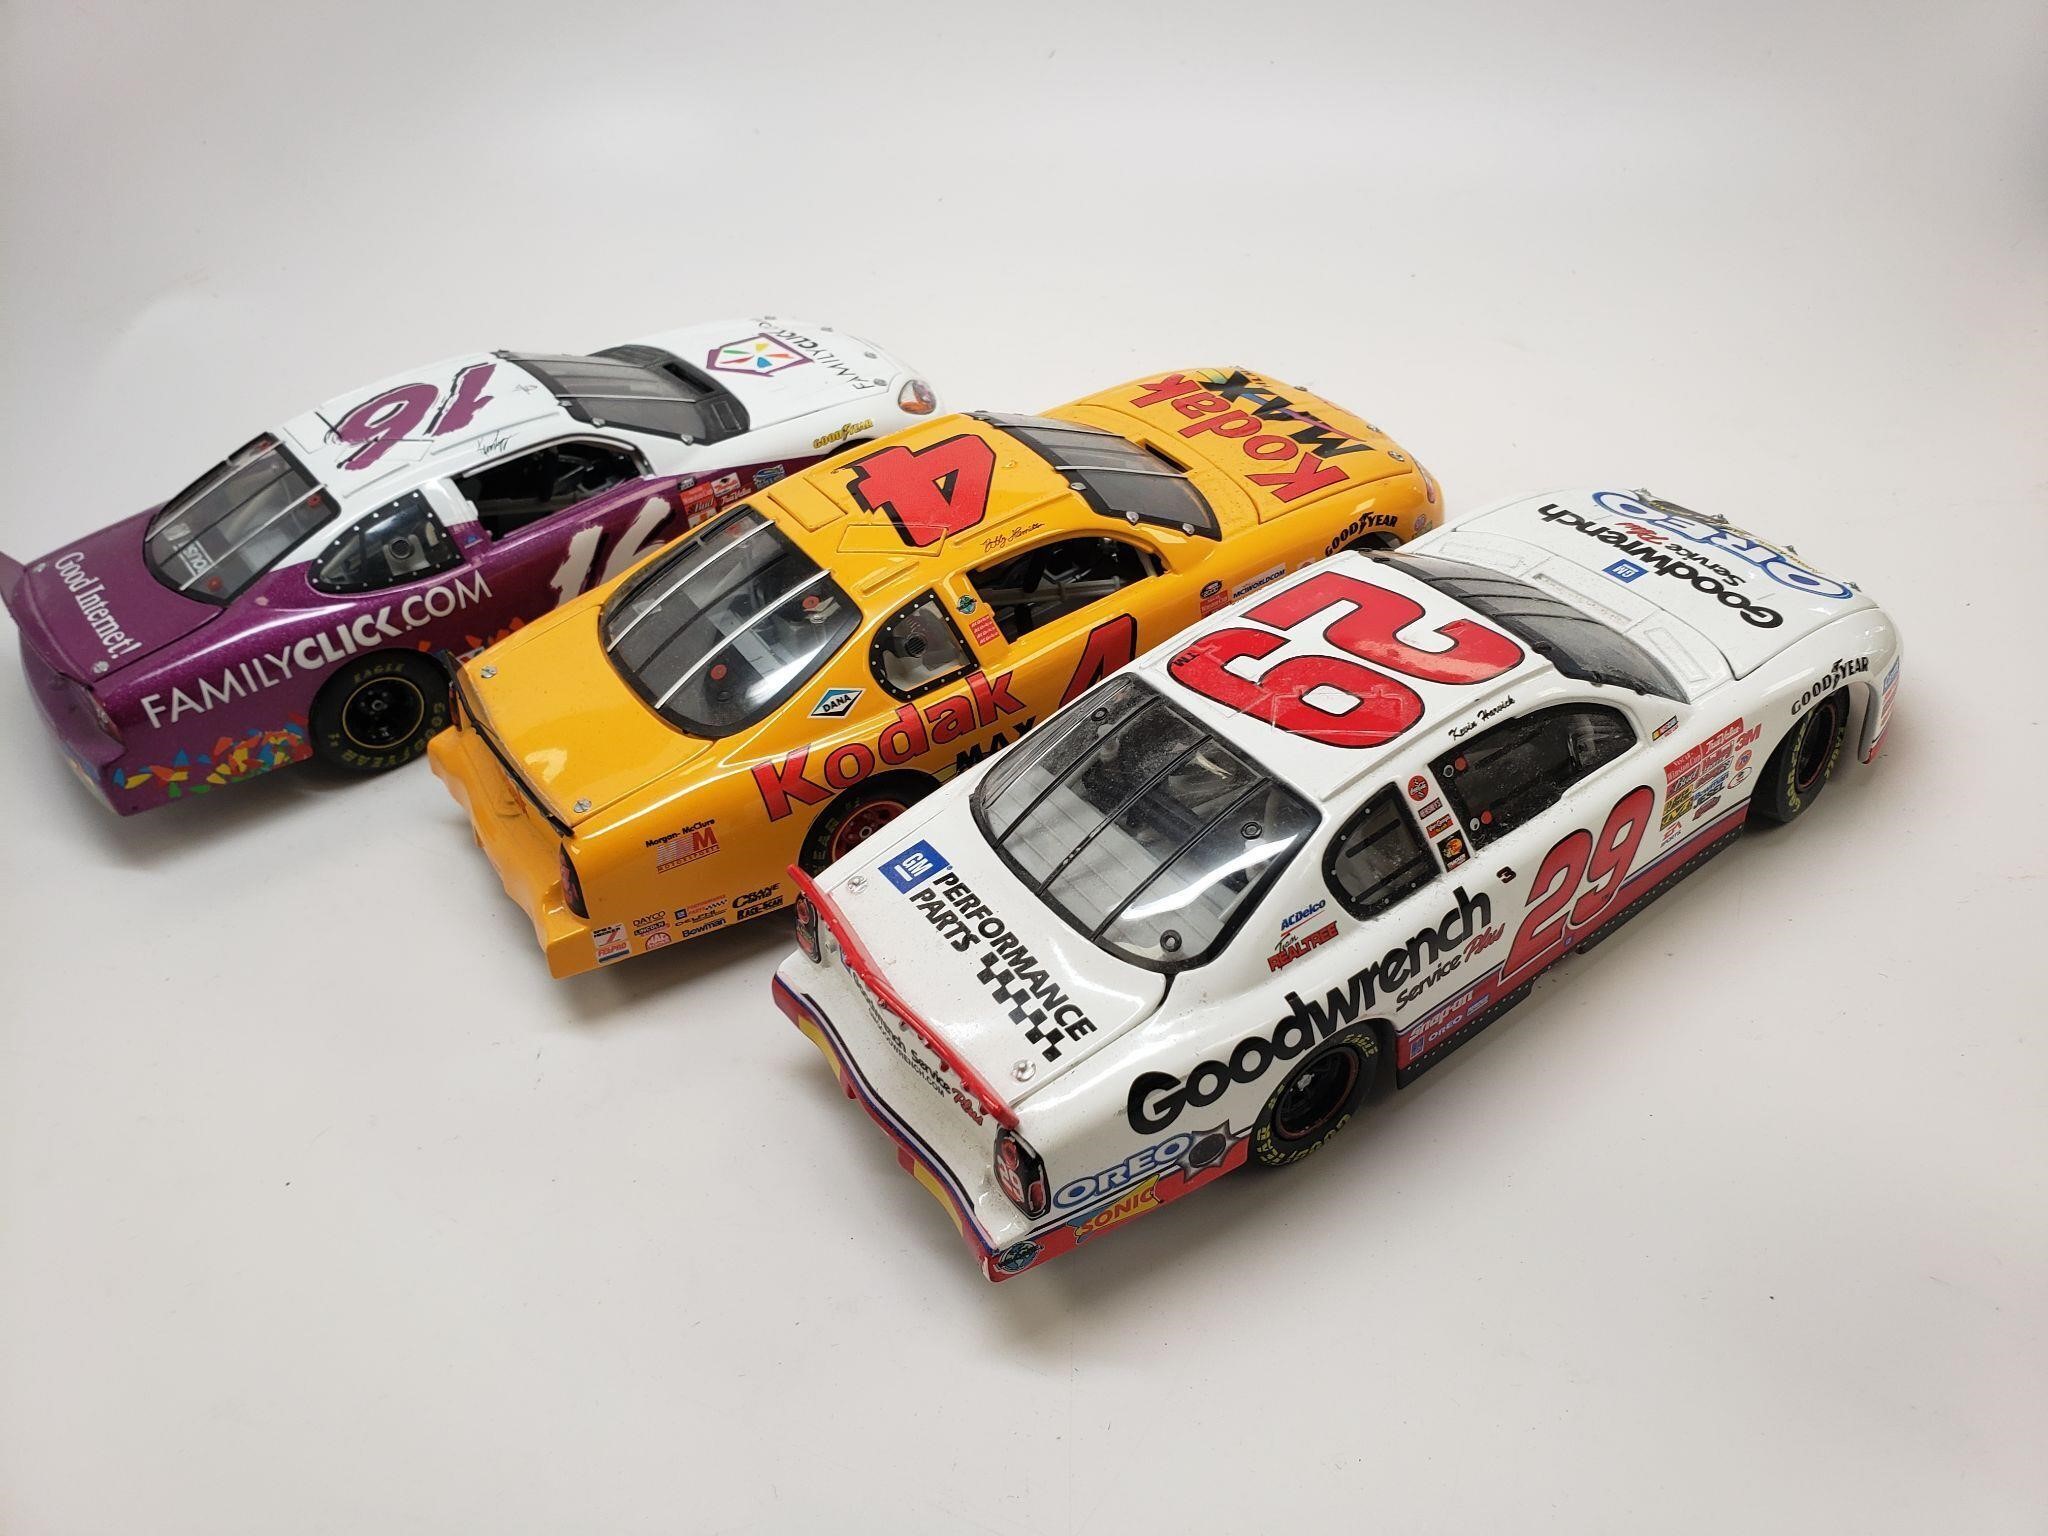 Three NASCAR 1:24 Scale Cars #16, #4 and #29